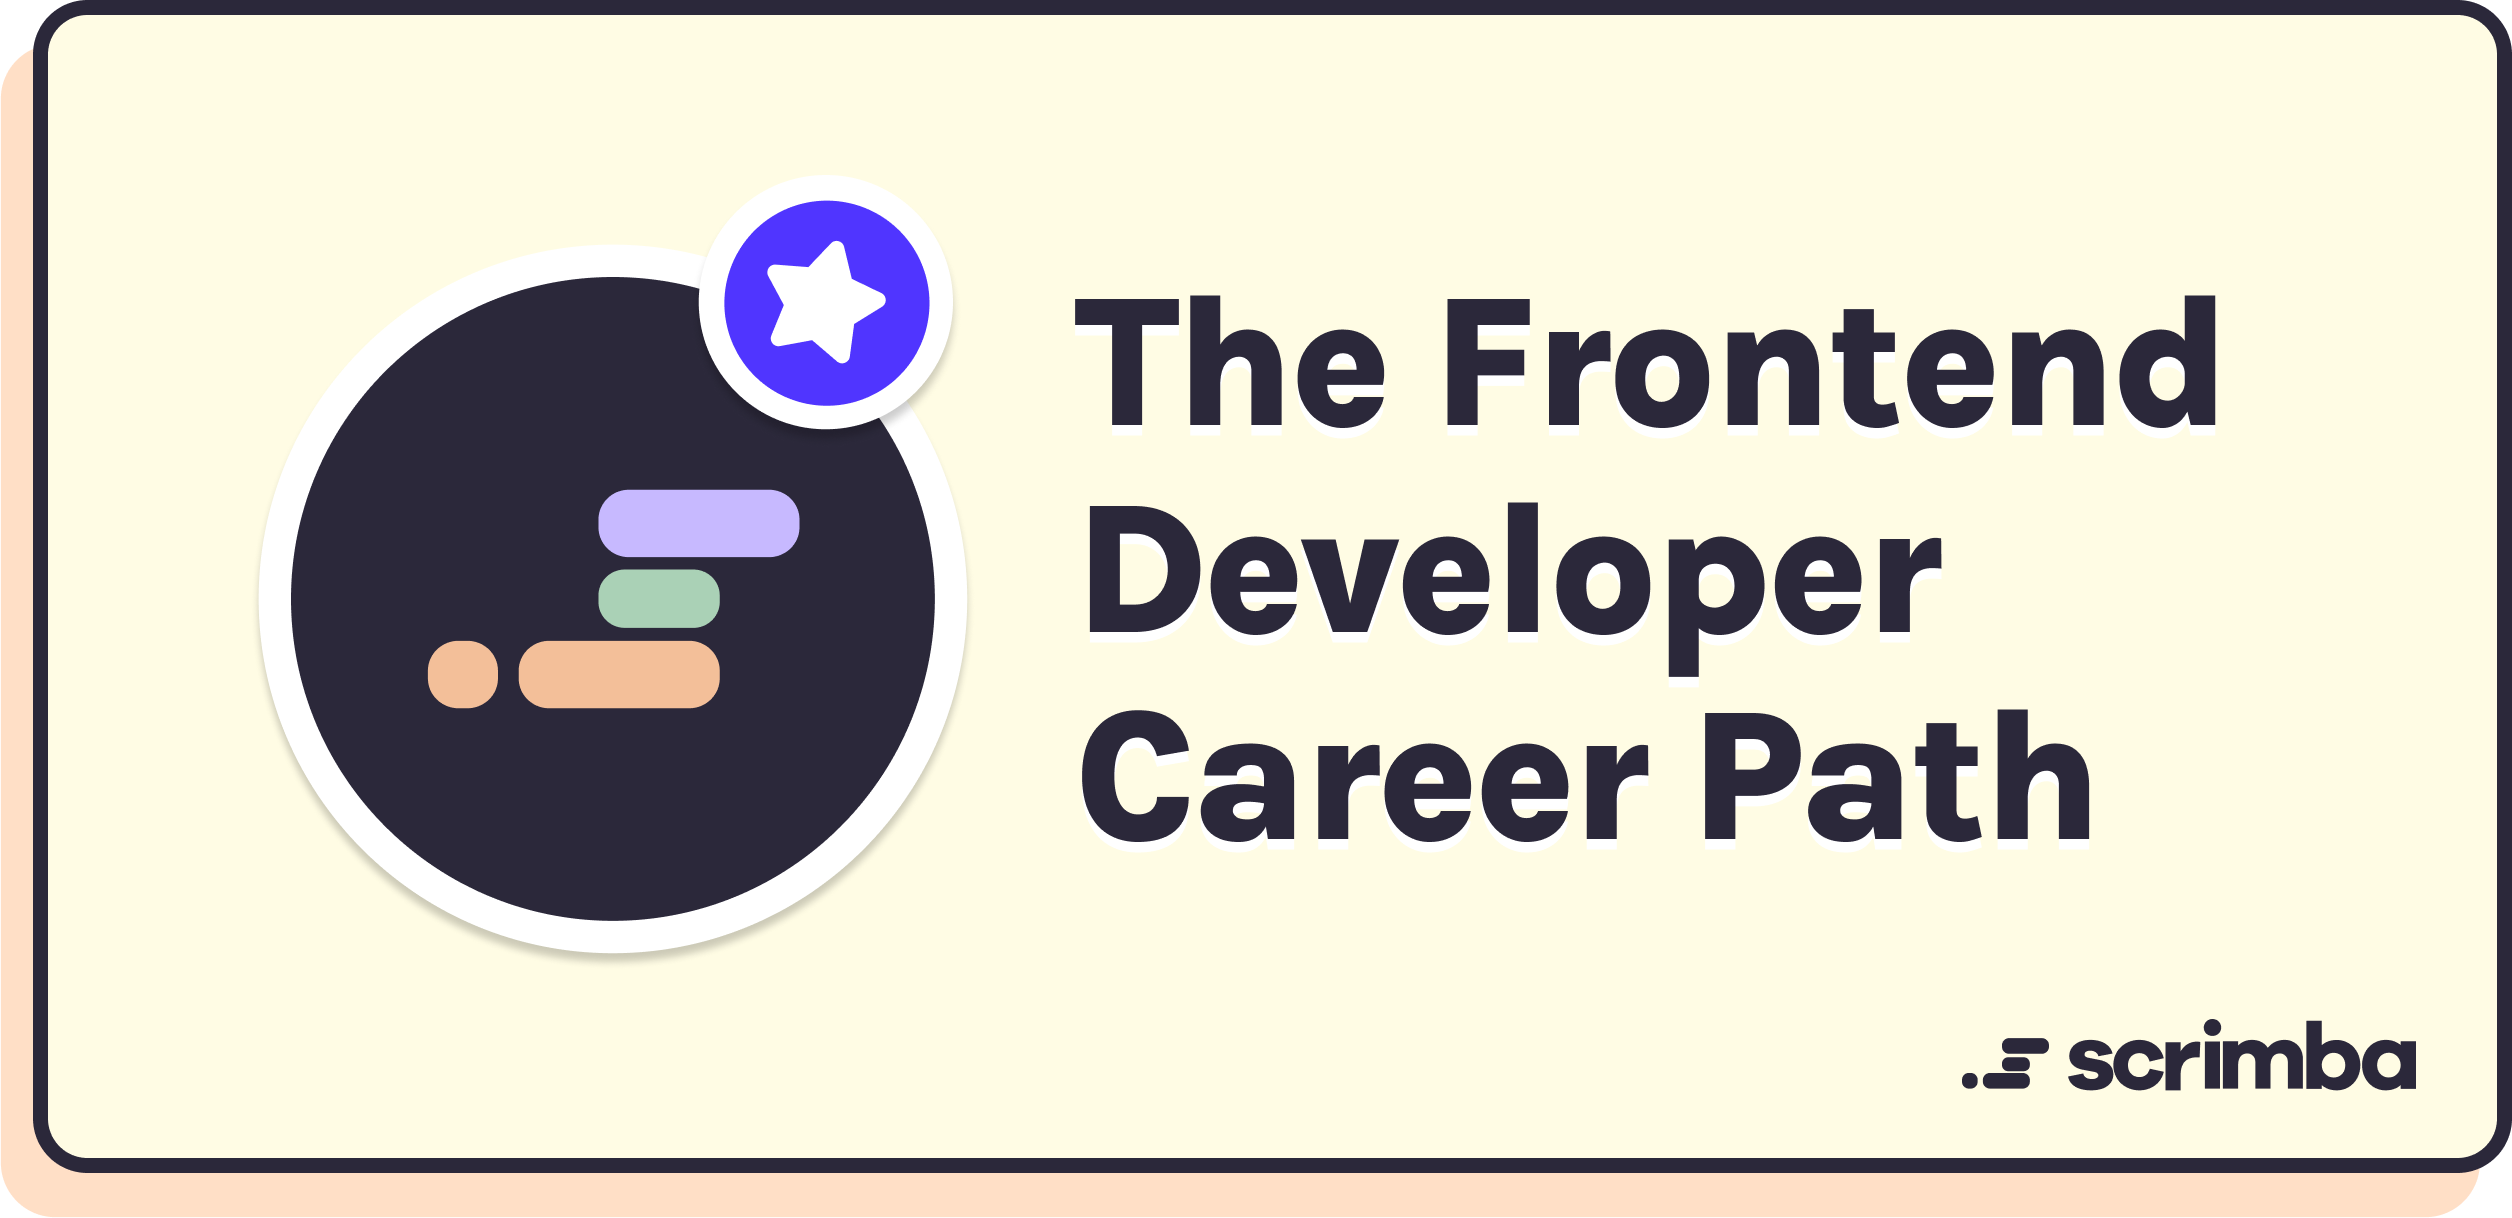 The Frontend Developer Career Path